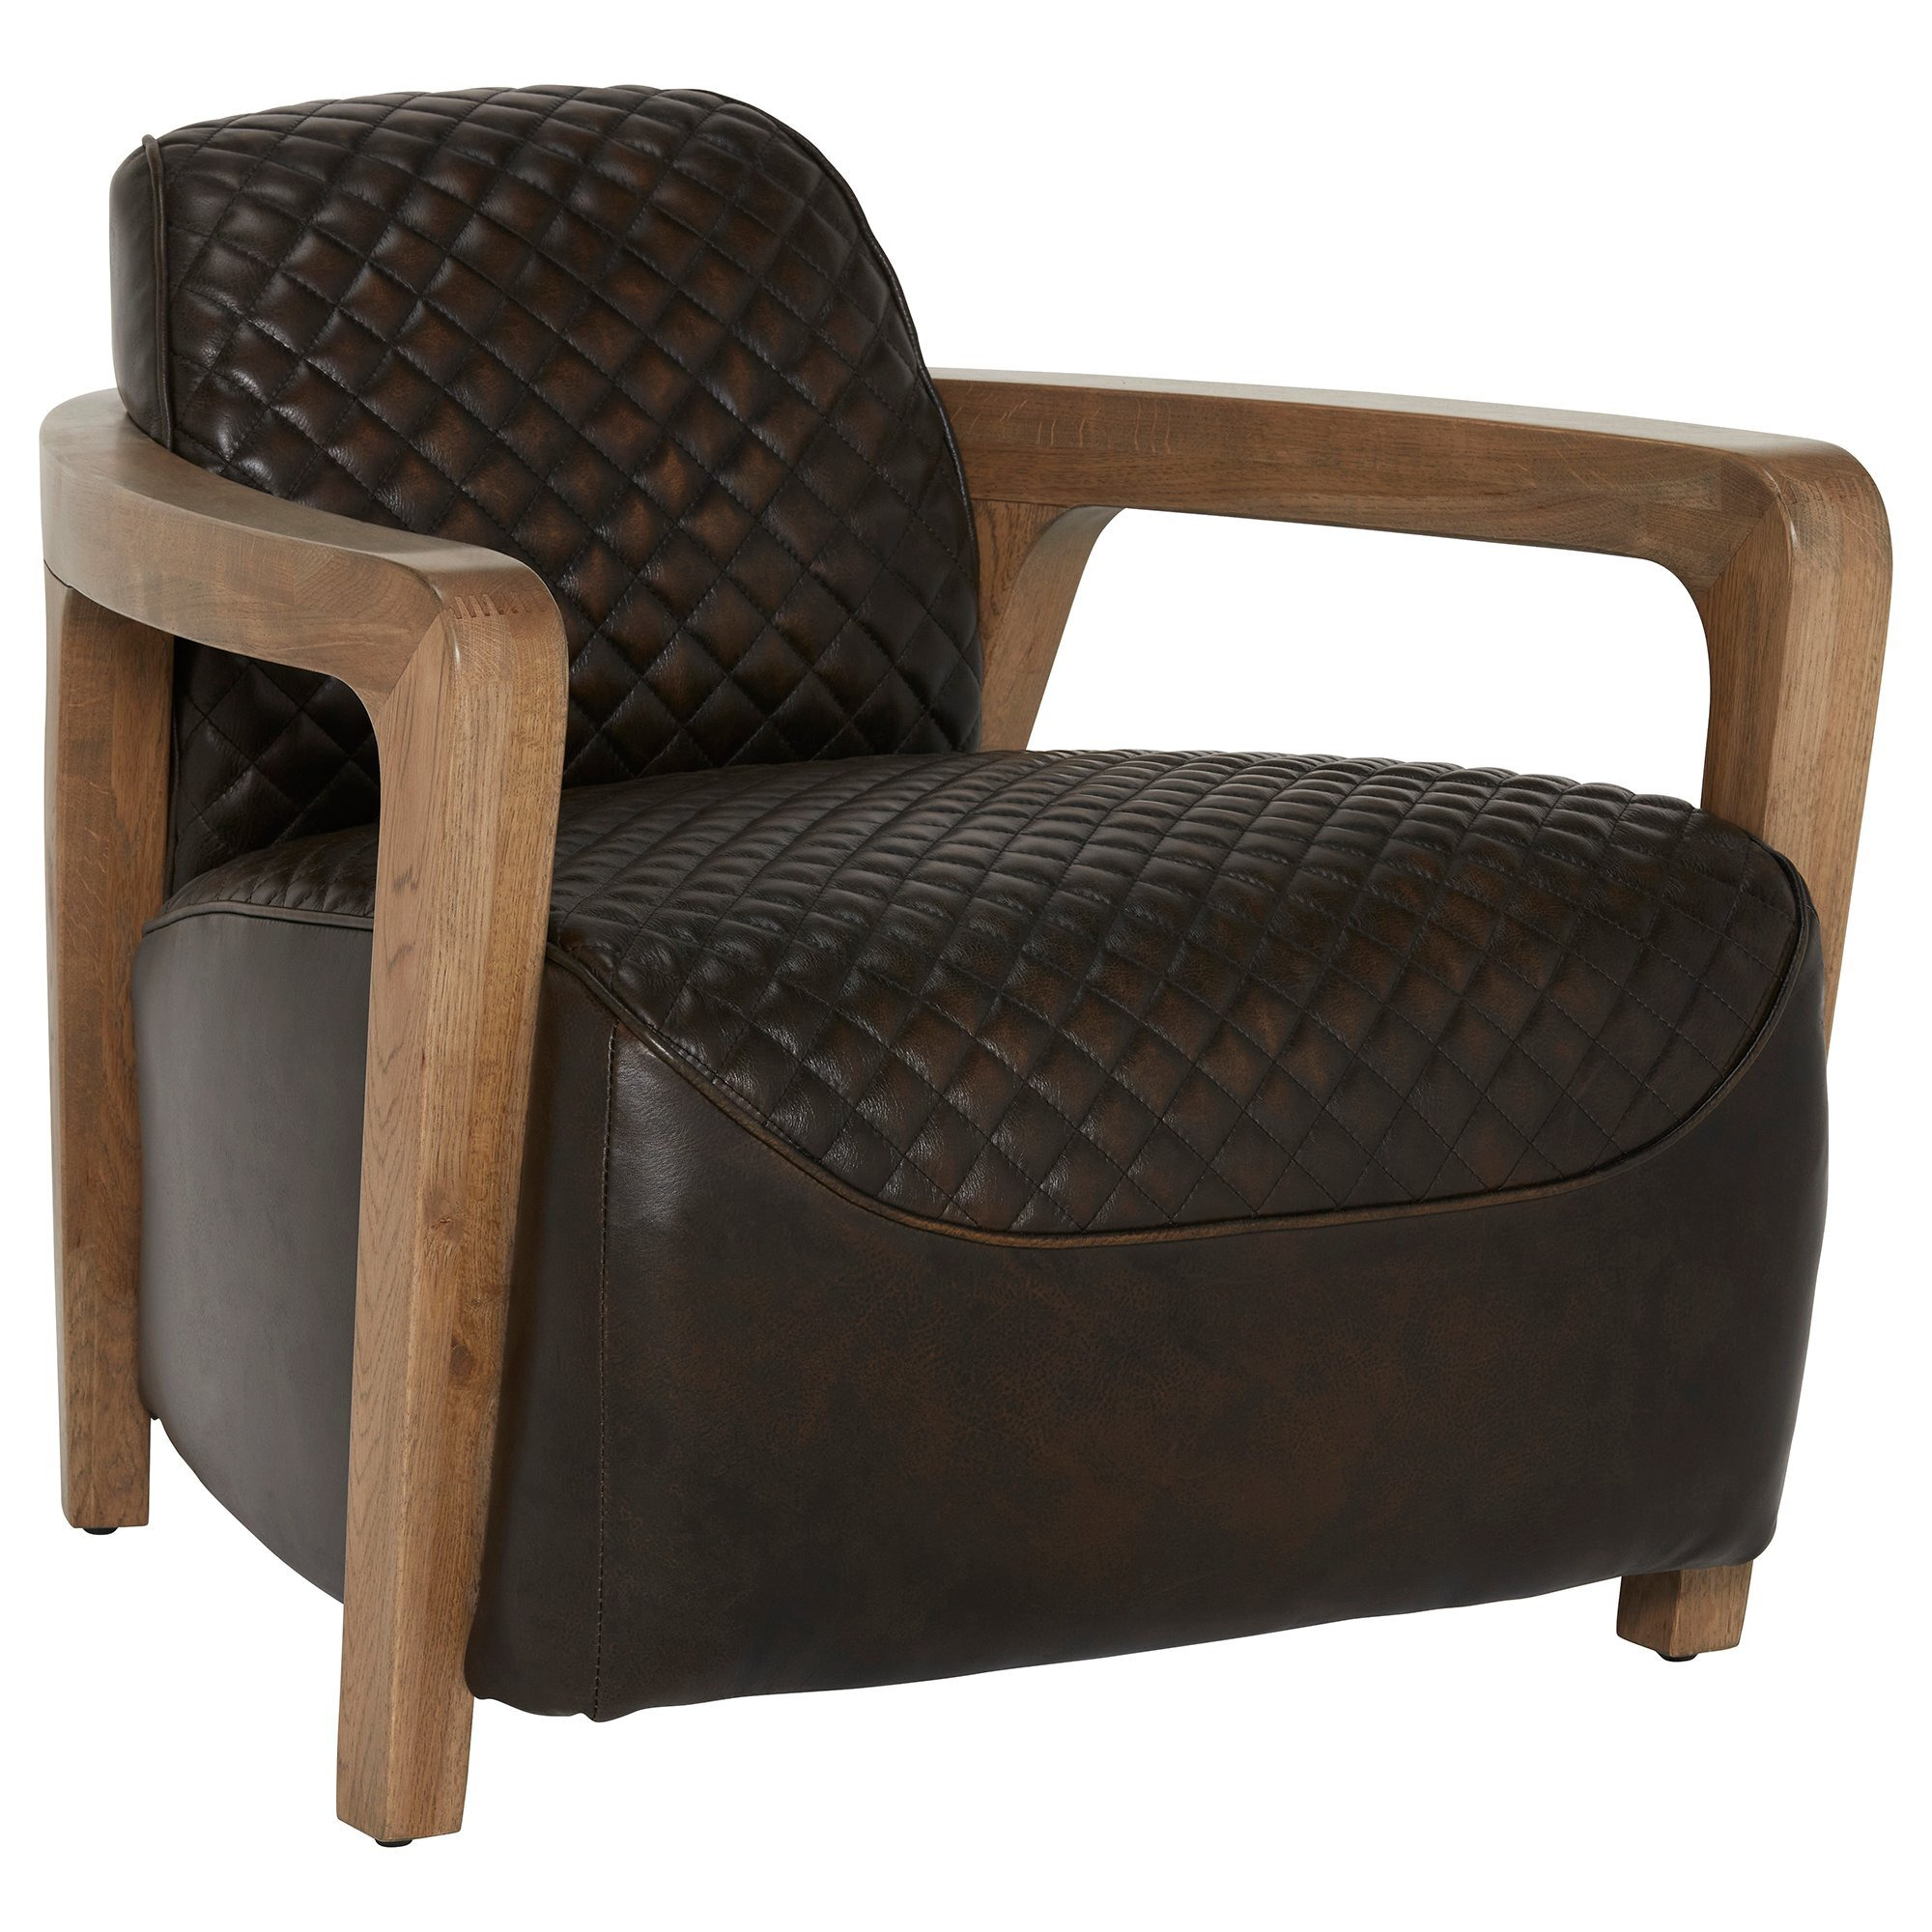 Timothy Oulton Wildcat Armchair, Brown Leather - Barker & Stonehouse - image 1